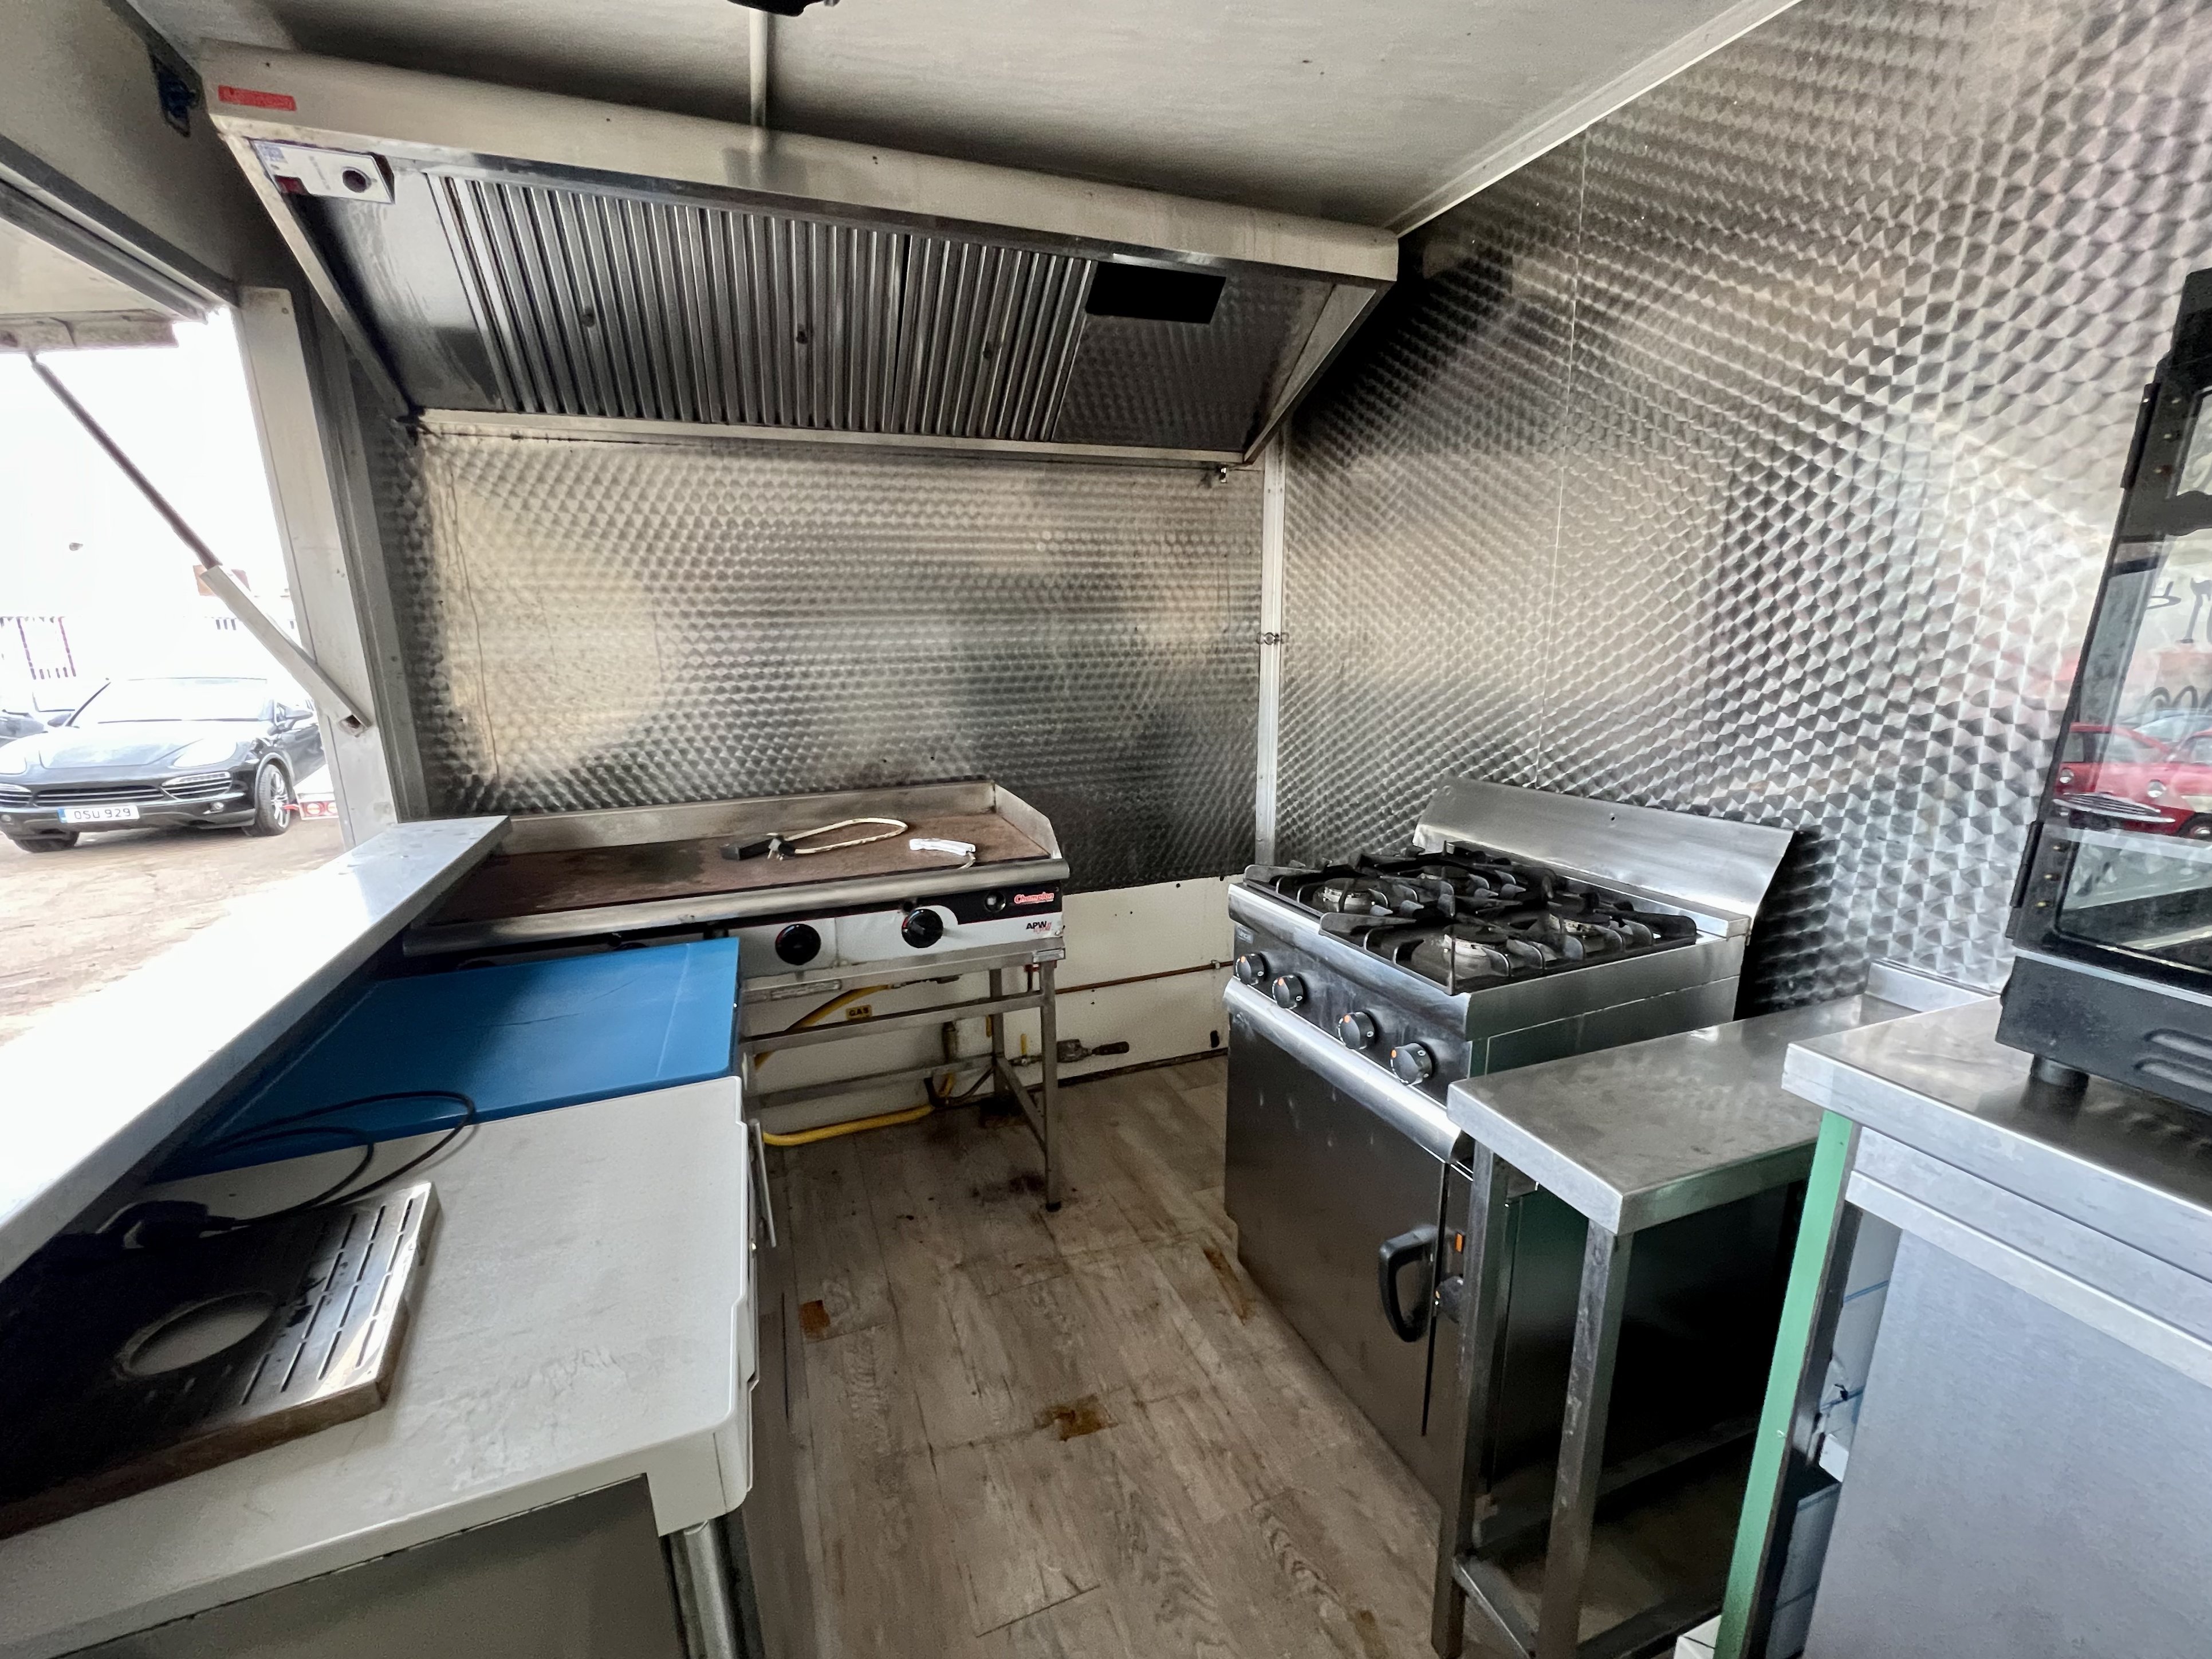 Catering Trailer - Image 8 of 17